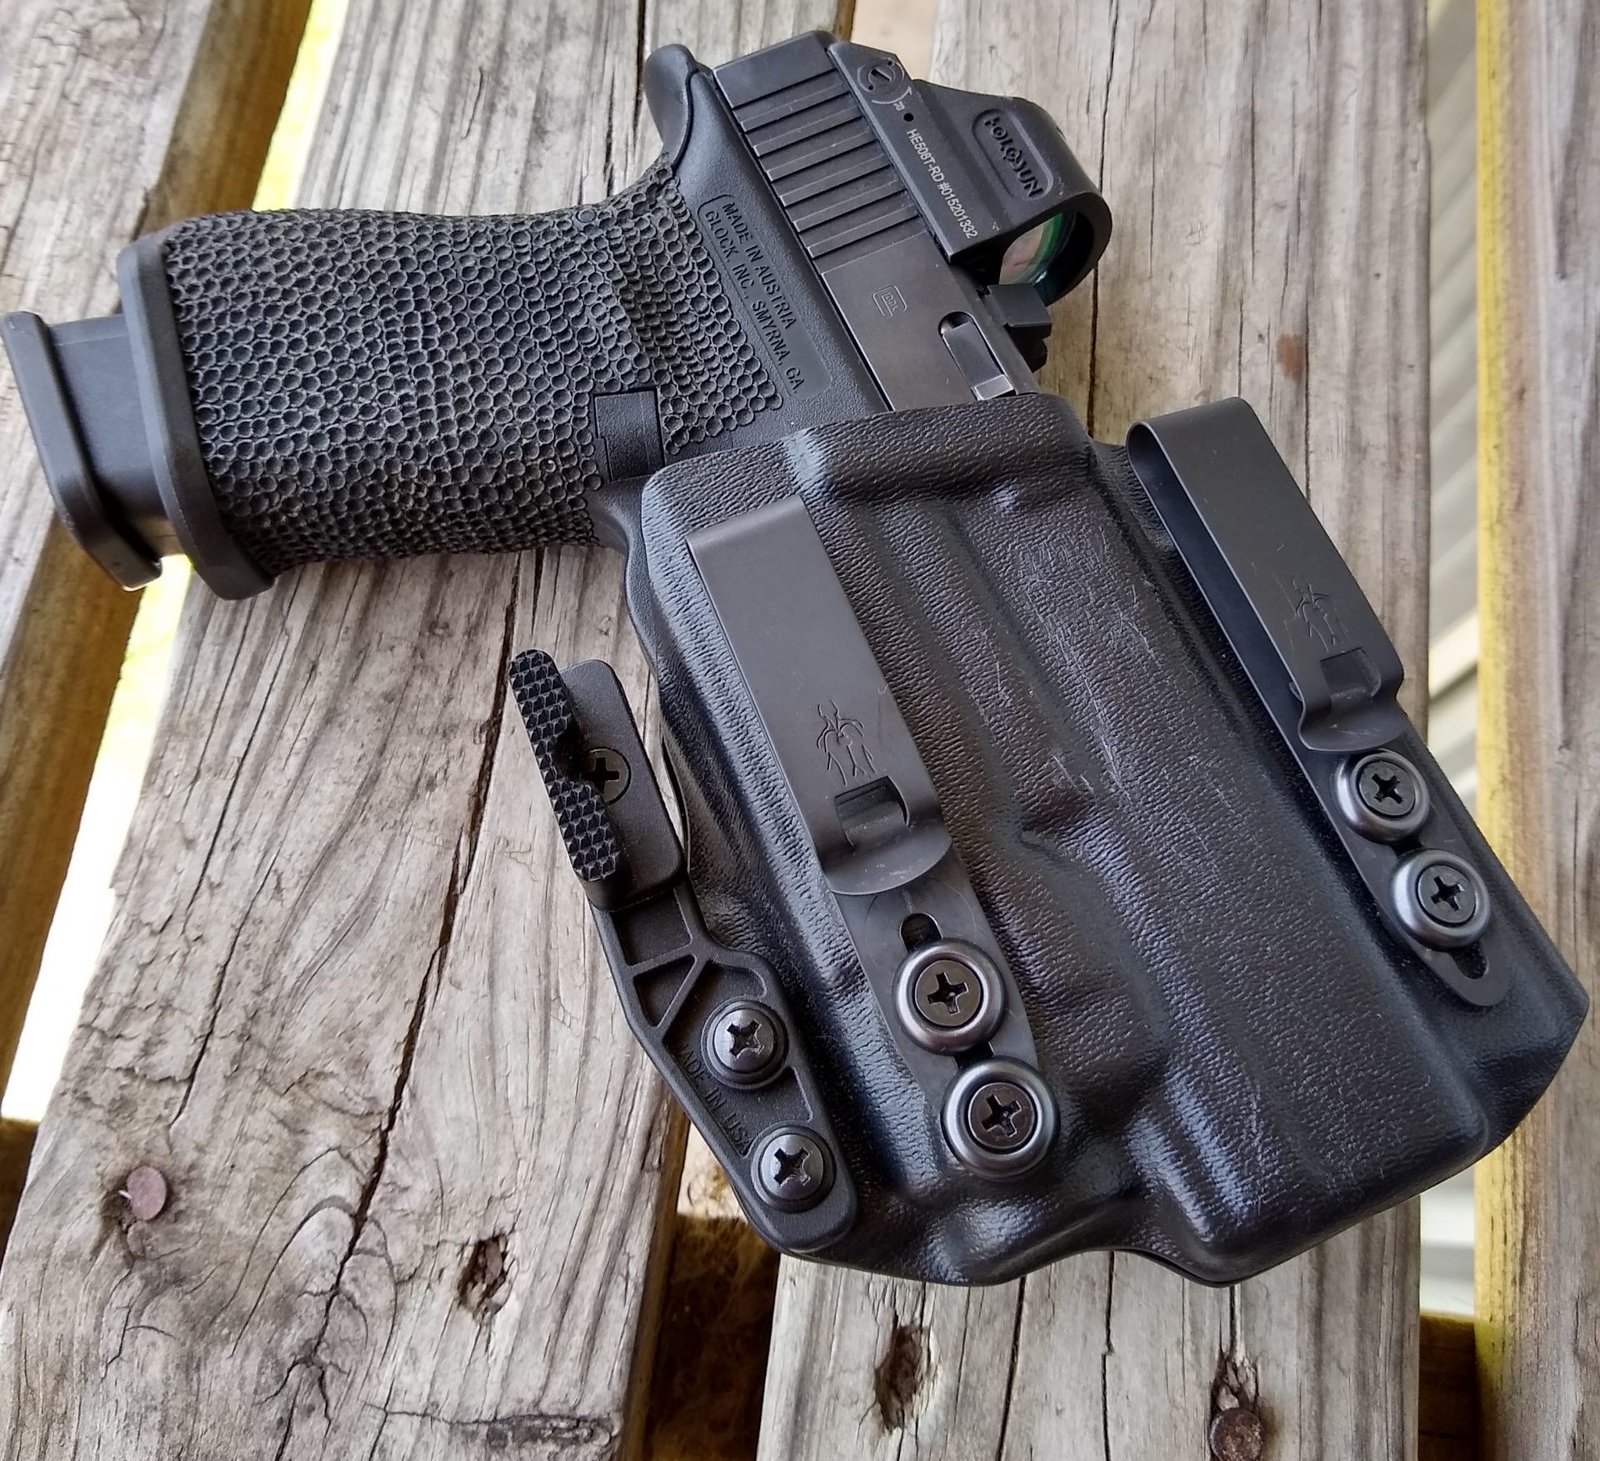 KSG Armory Doulos Holster Review Primer